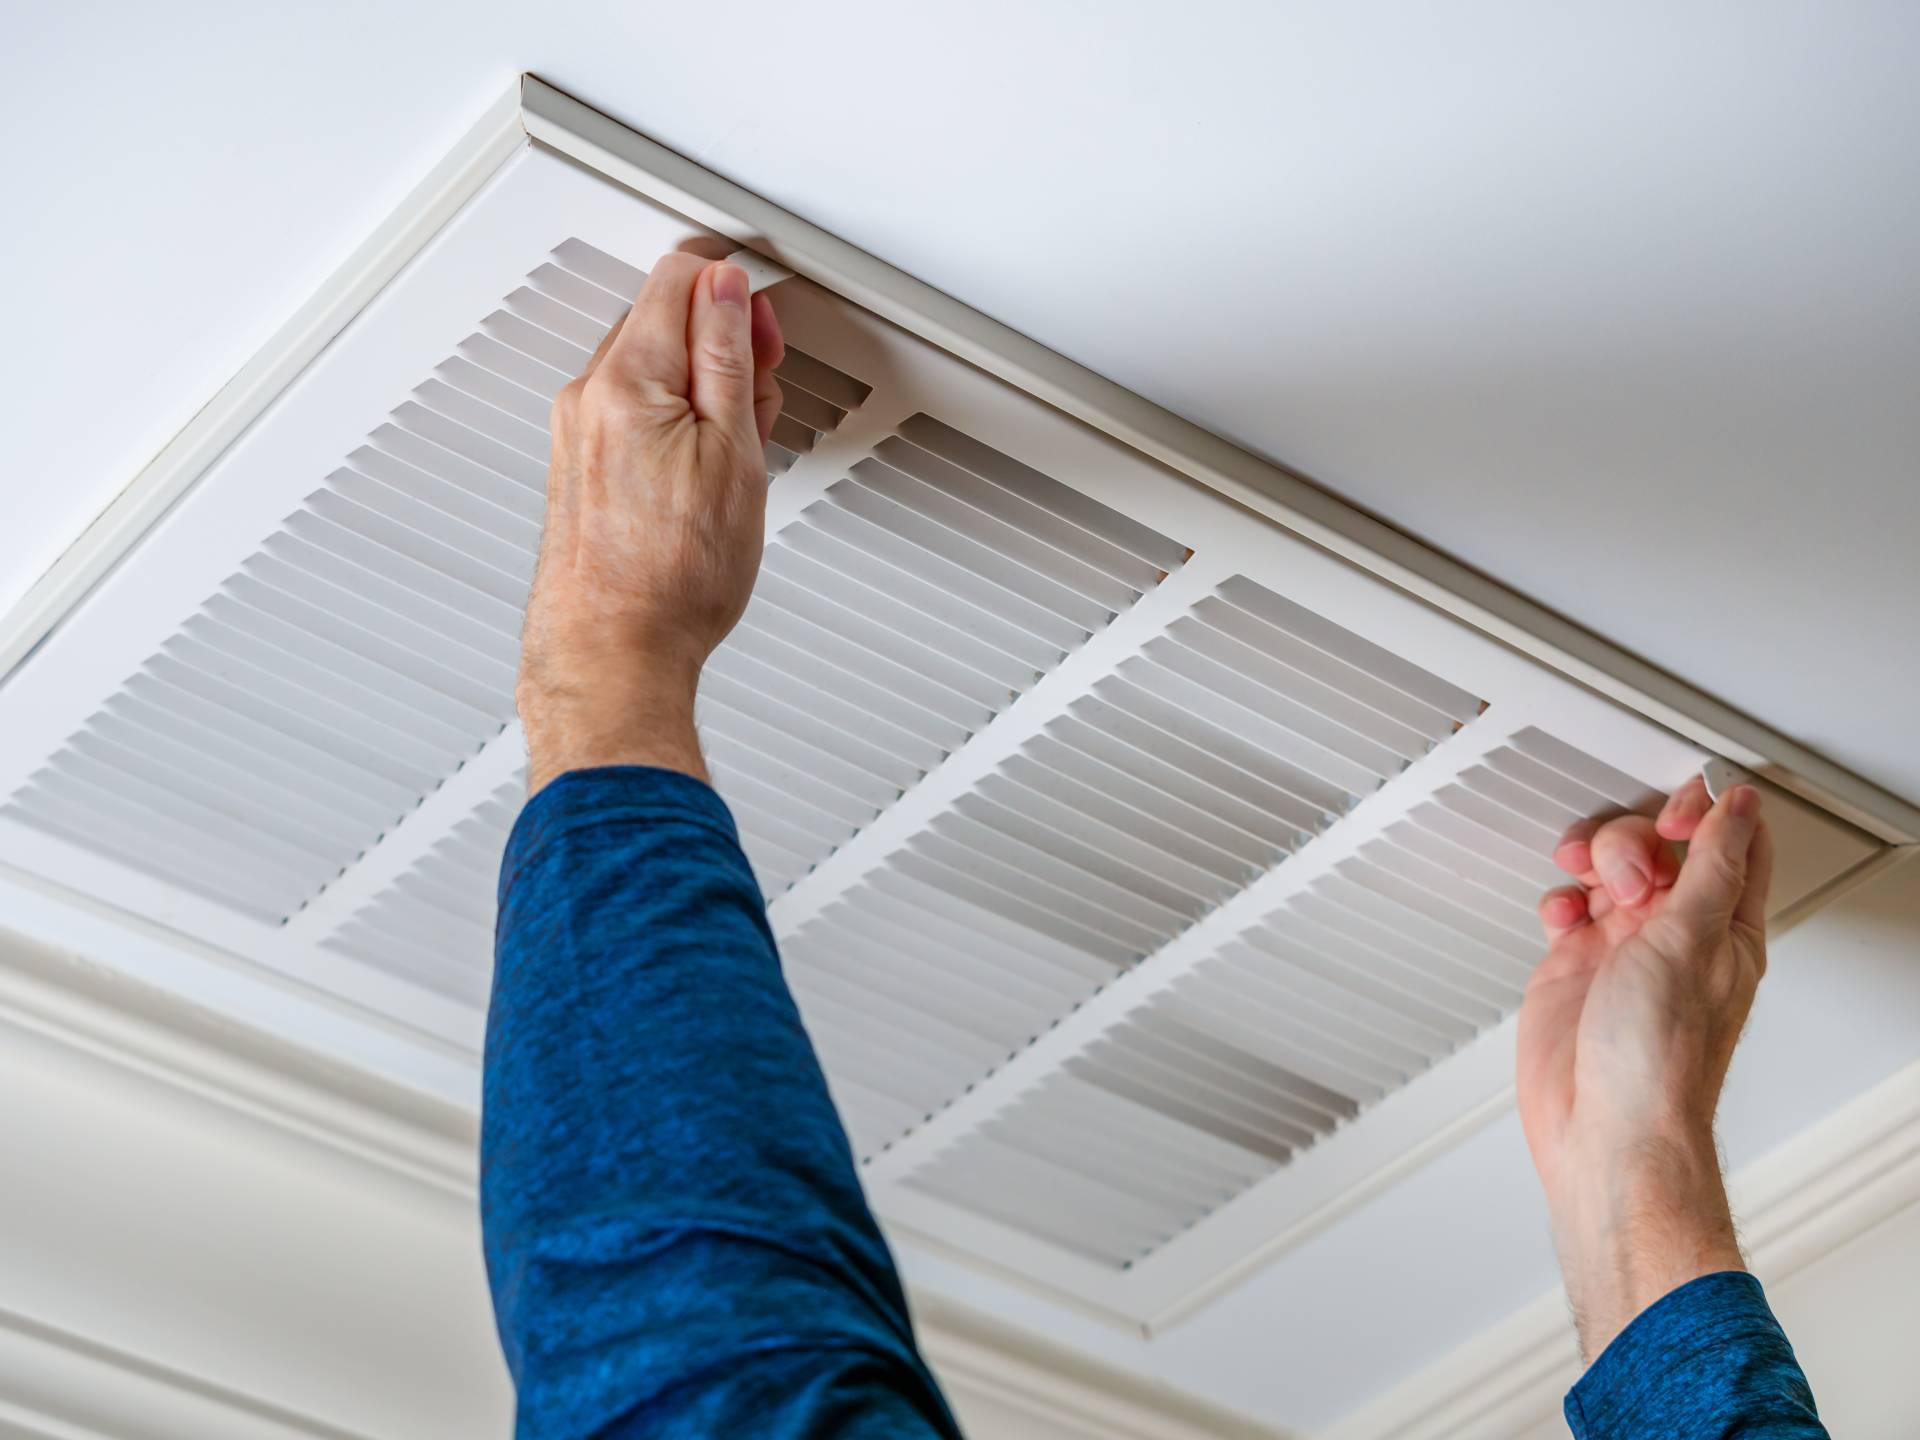 Professional Air Duct Cleaning Services Including Air Quality Testing